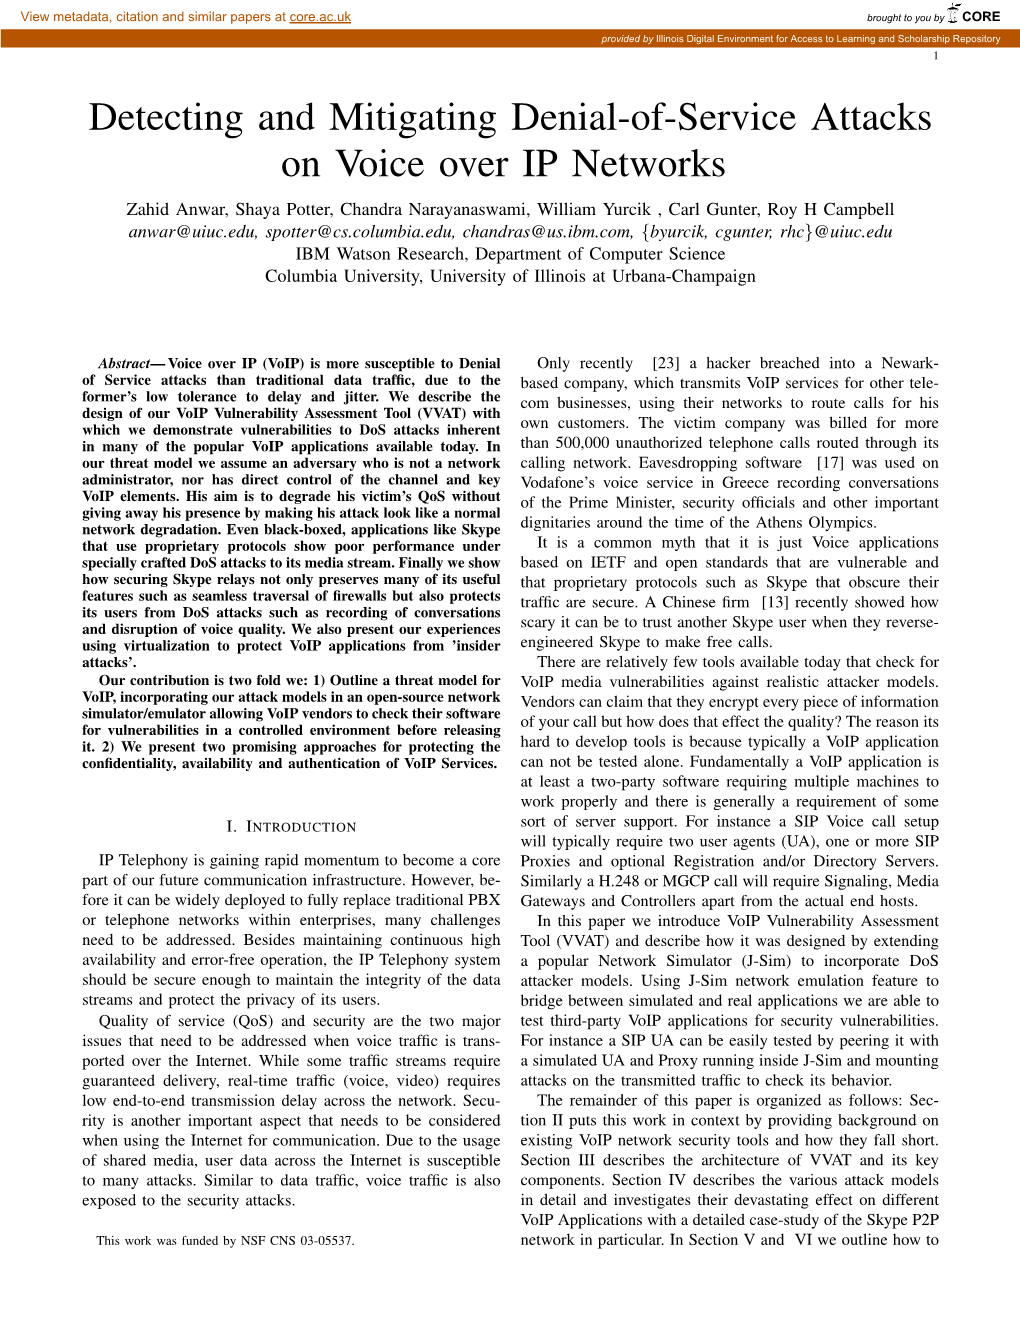 Detecting and Mitigating Denial-Of-Service Attacks on Voice